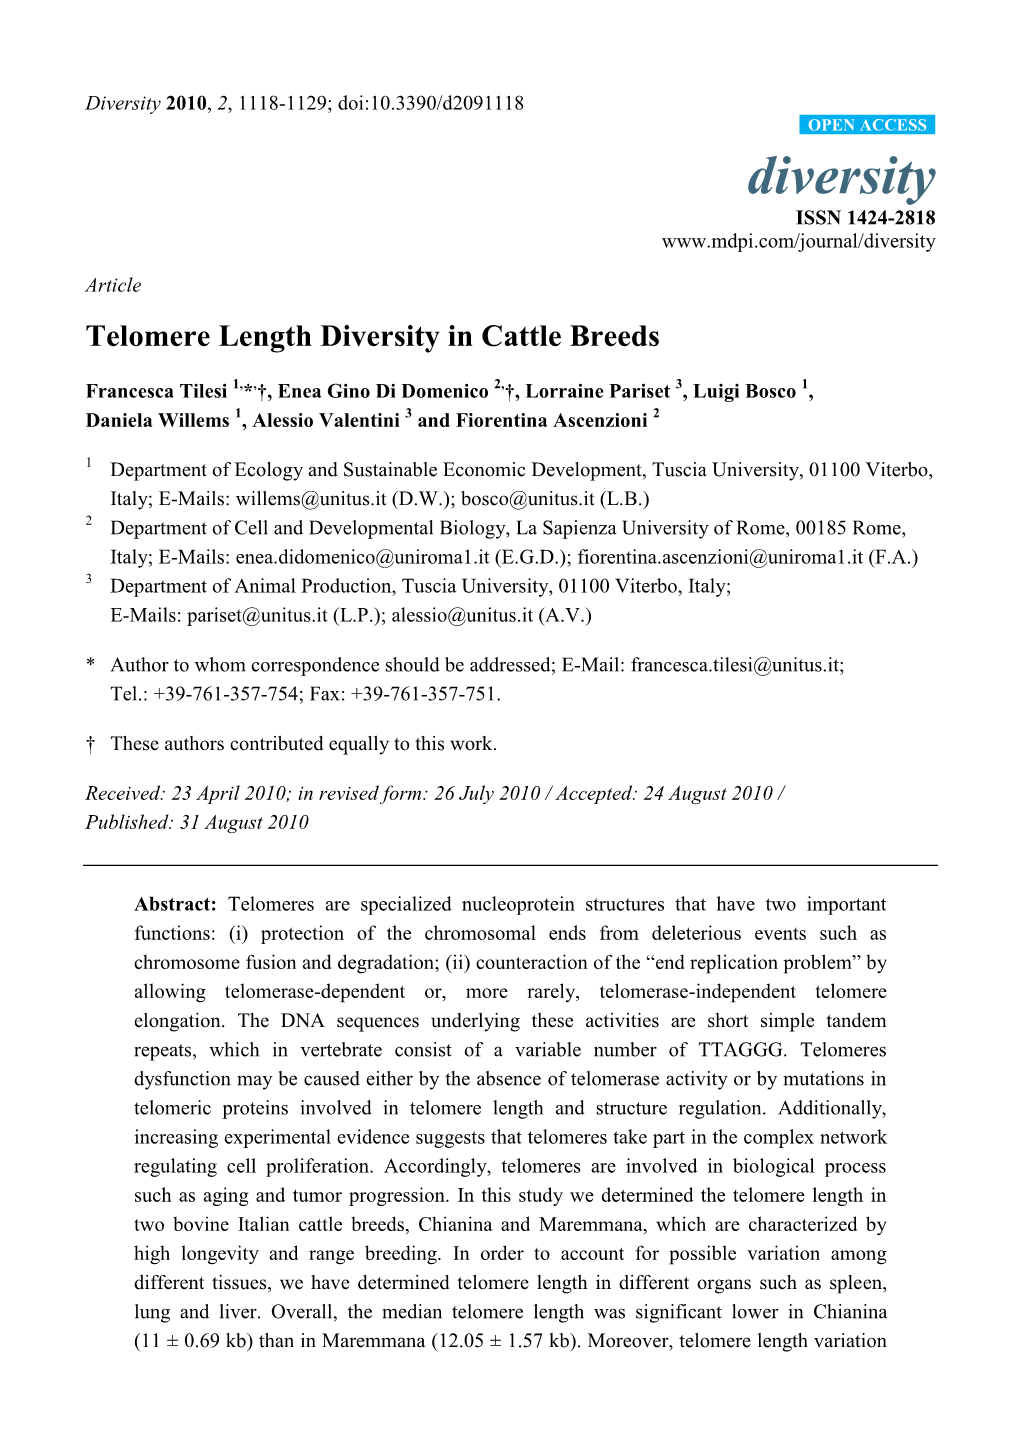 Telomere Length Diversity in Cattle Breeds